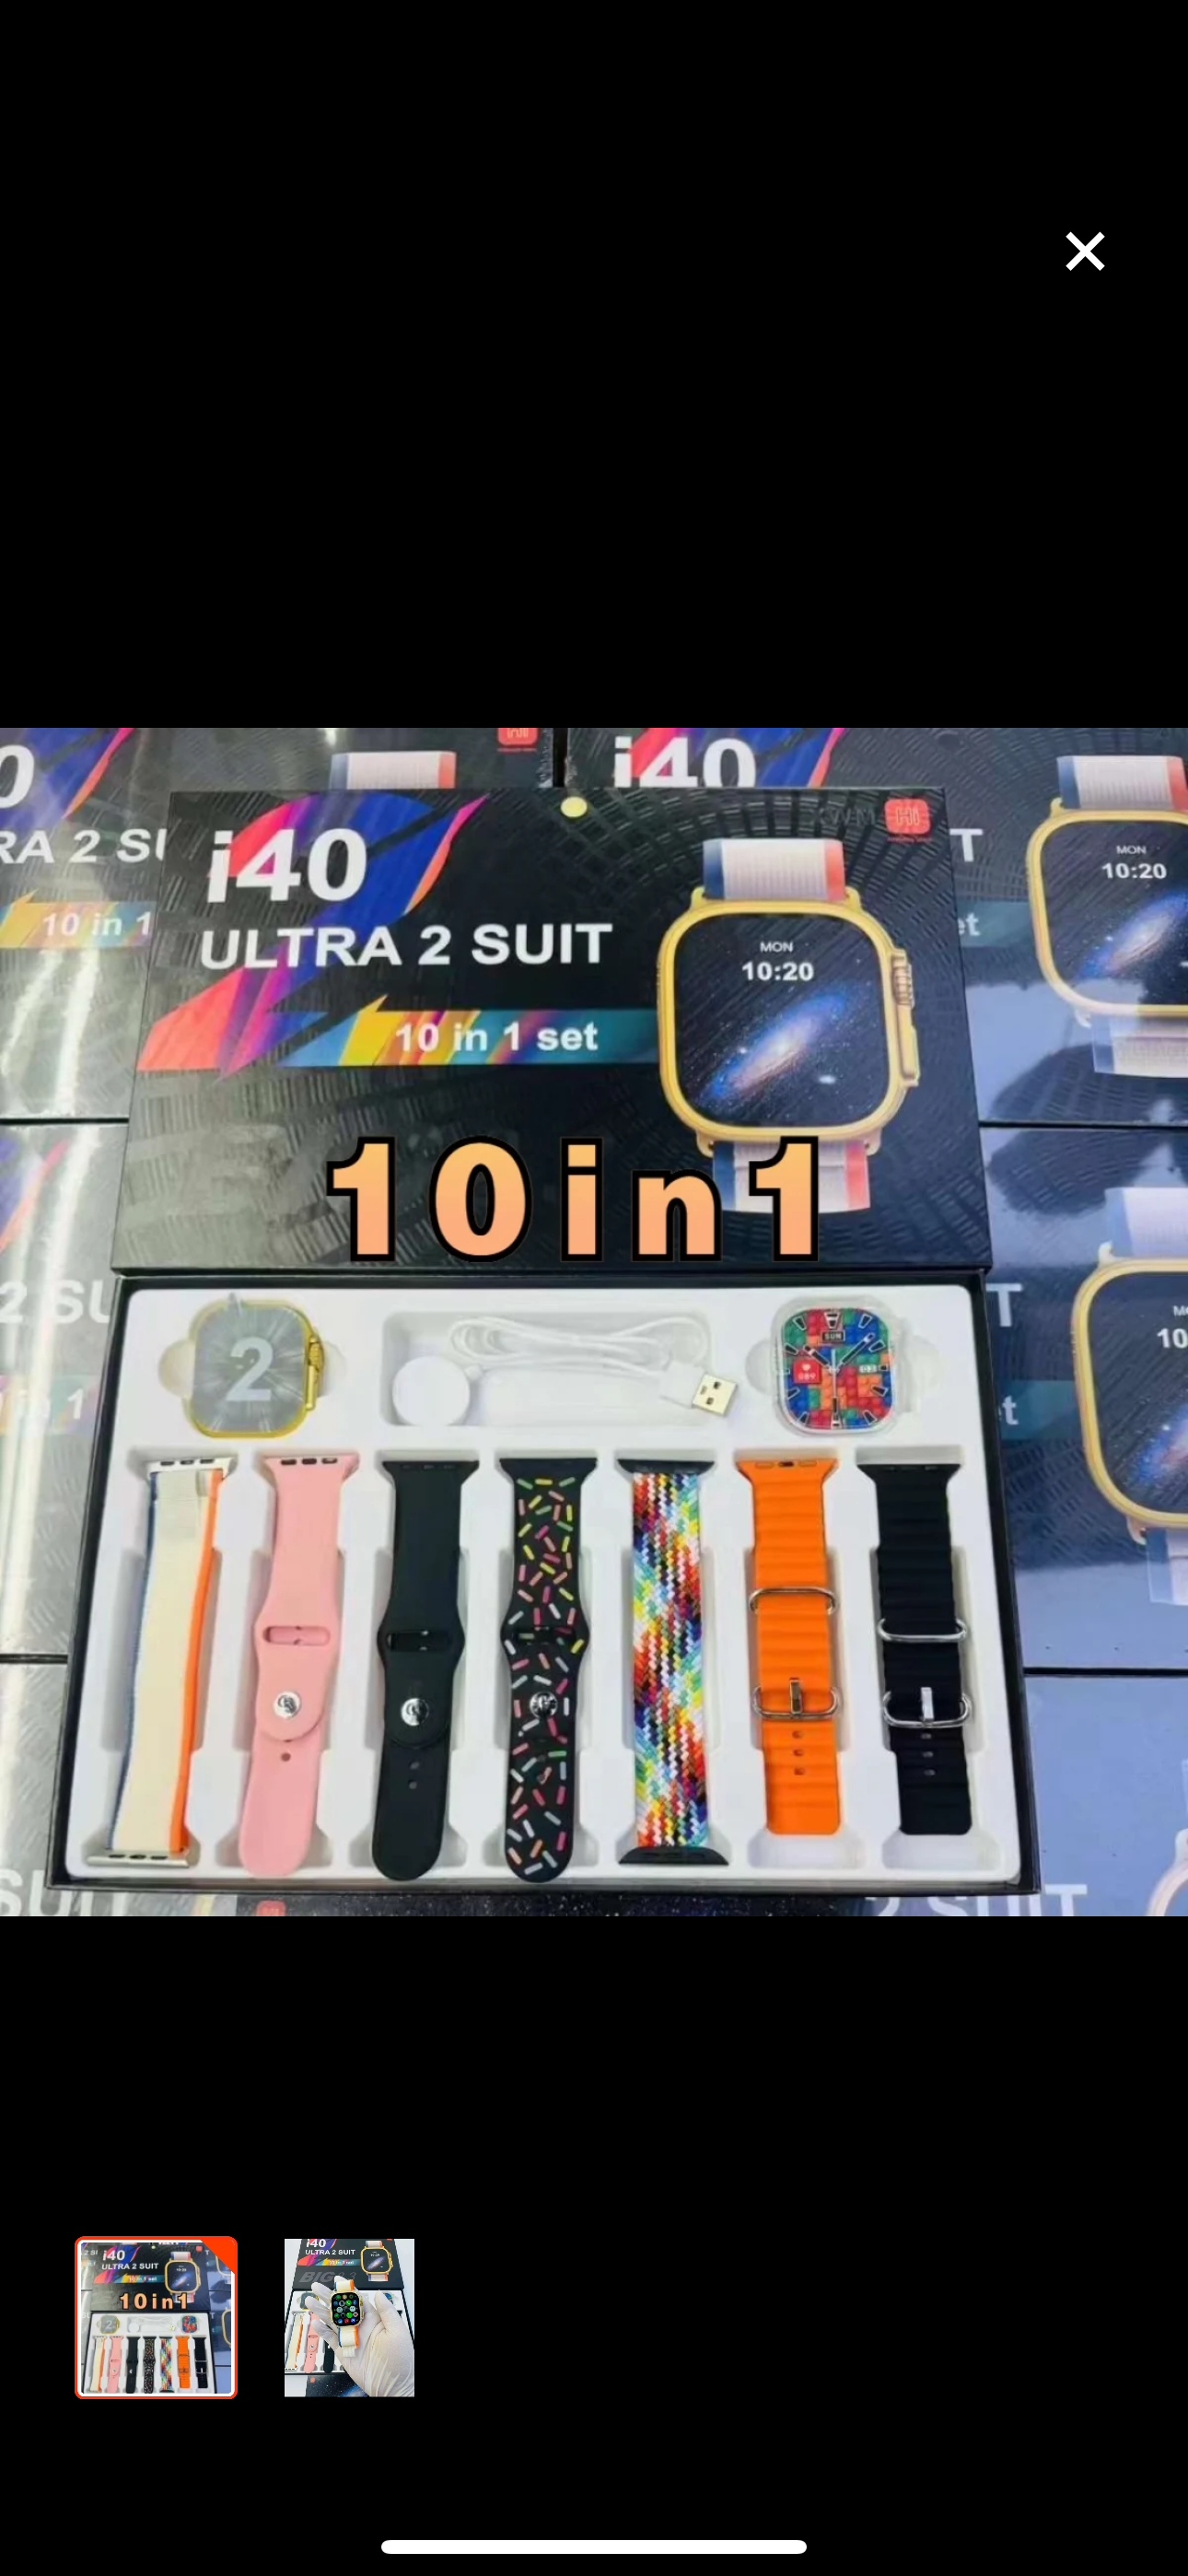 7 in 1 | i40 | SMART WATCH | ULTRA 2 SUIT | Golden Dial | Silicon case